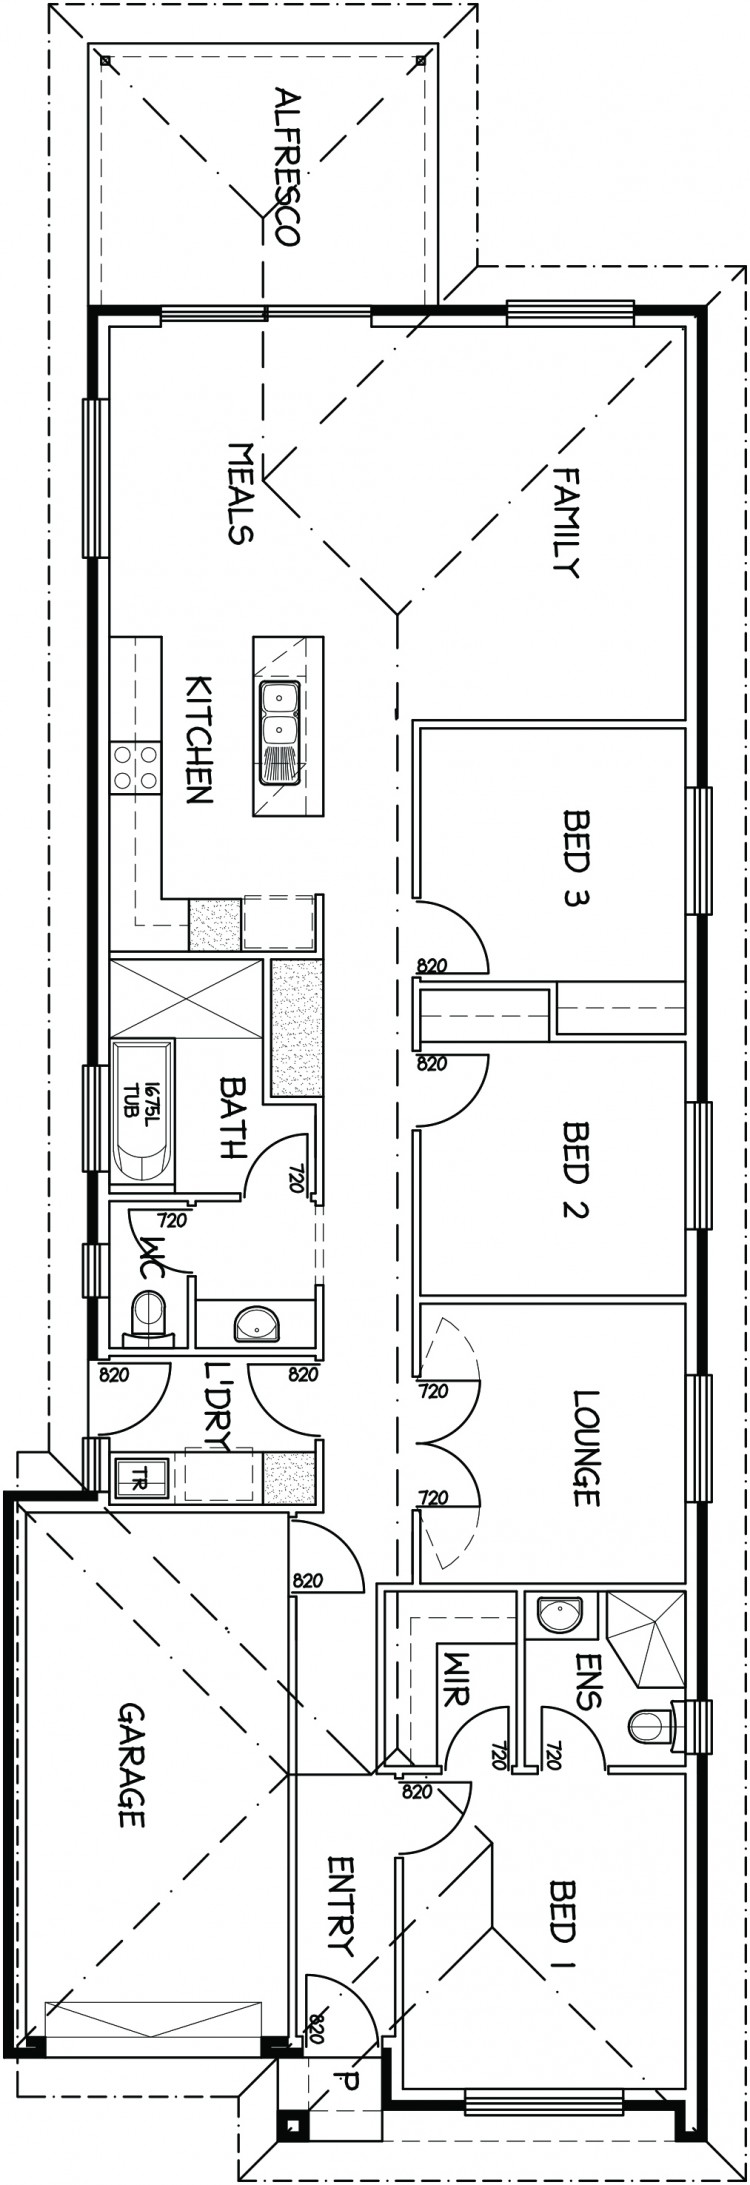 Lot 741 and 742 Number 16 Wintrena Street South Plympton FULL PLANS